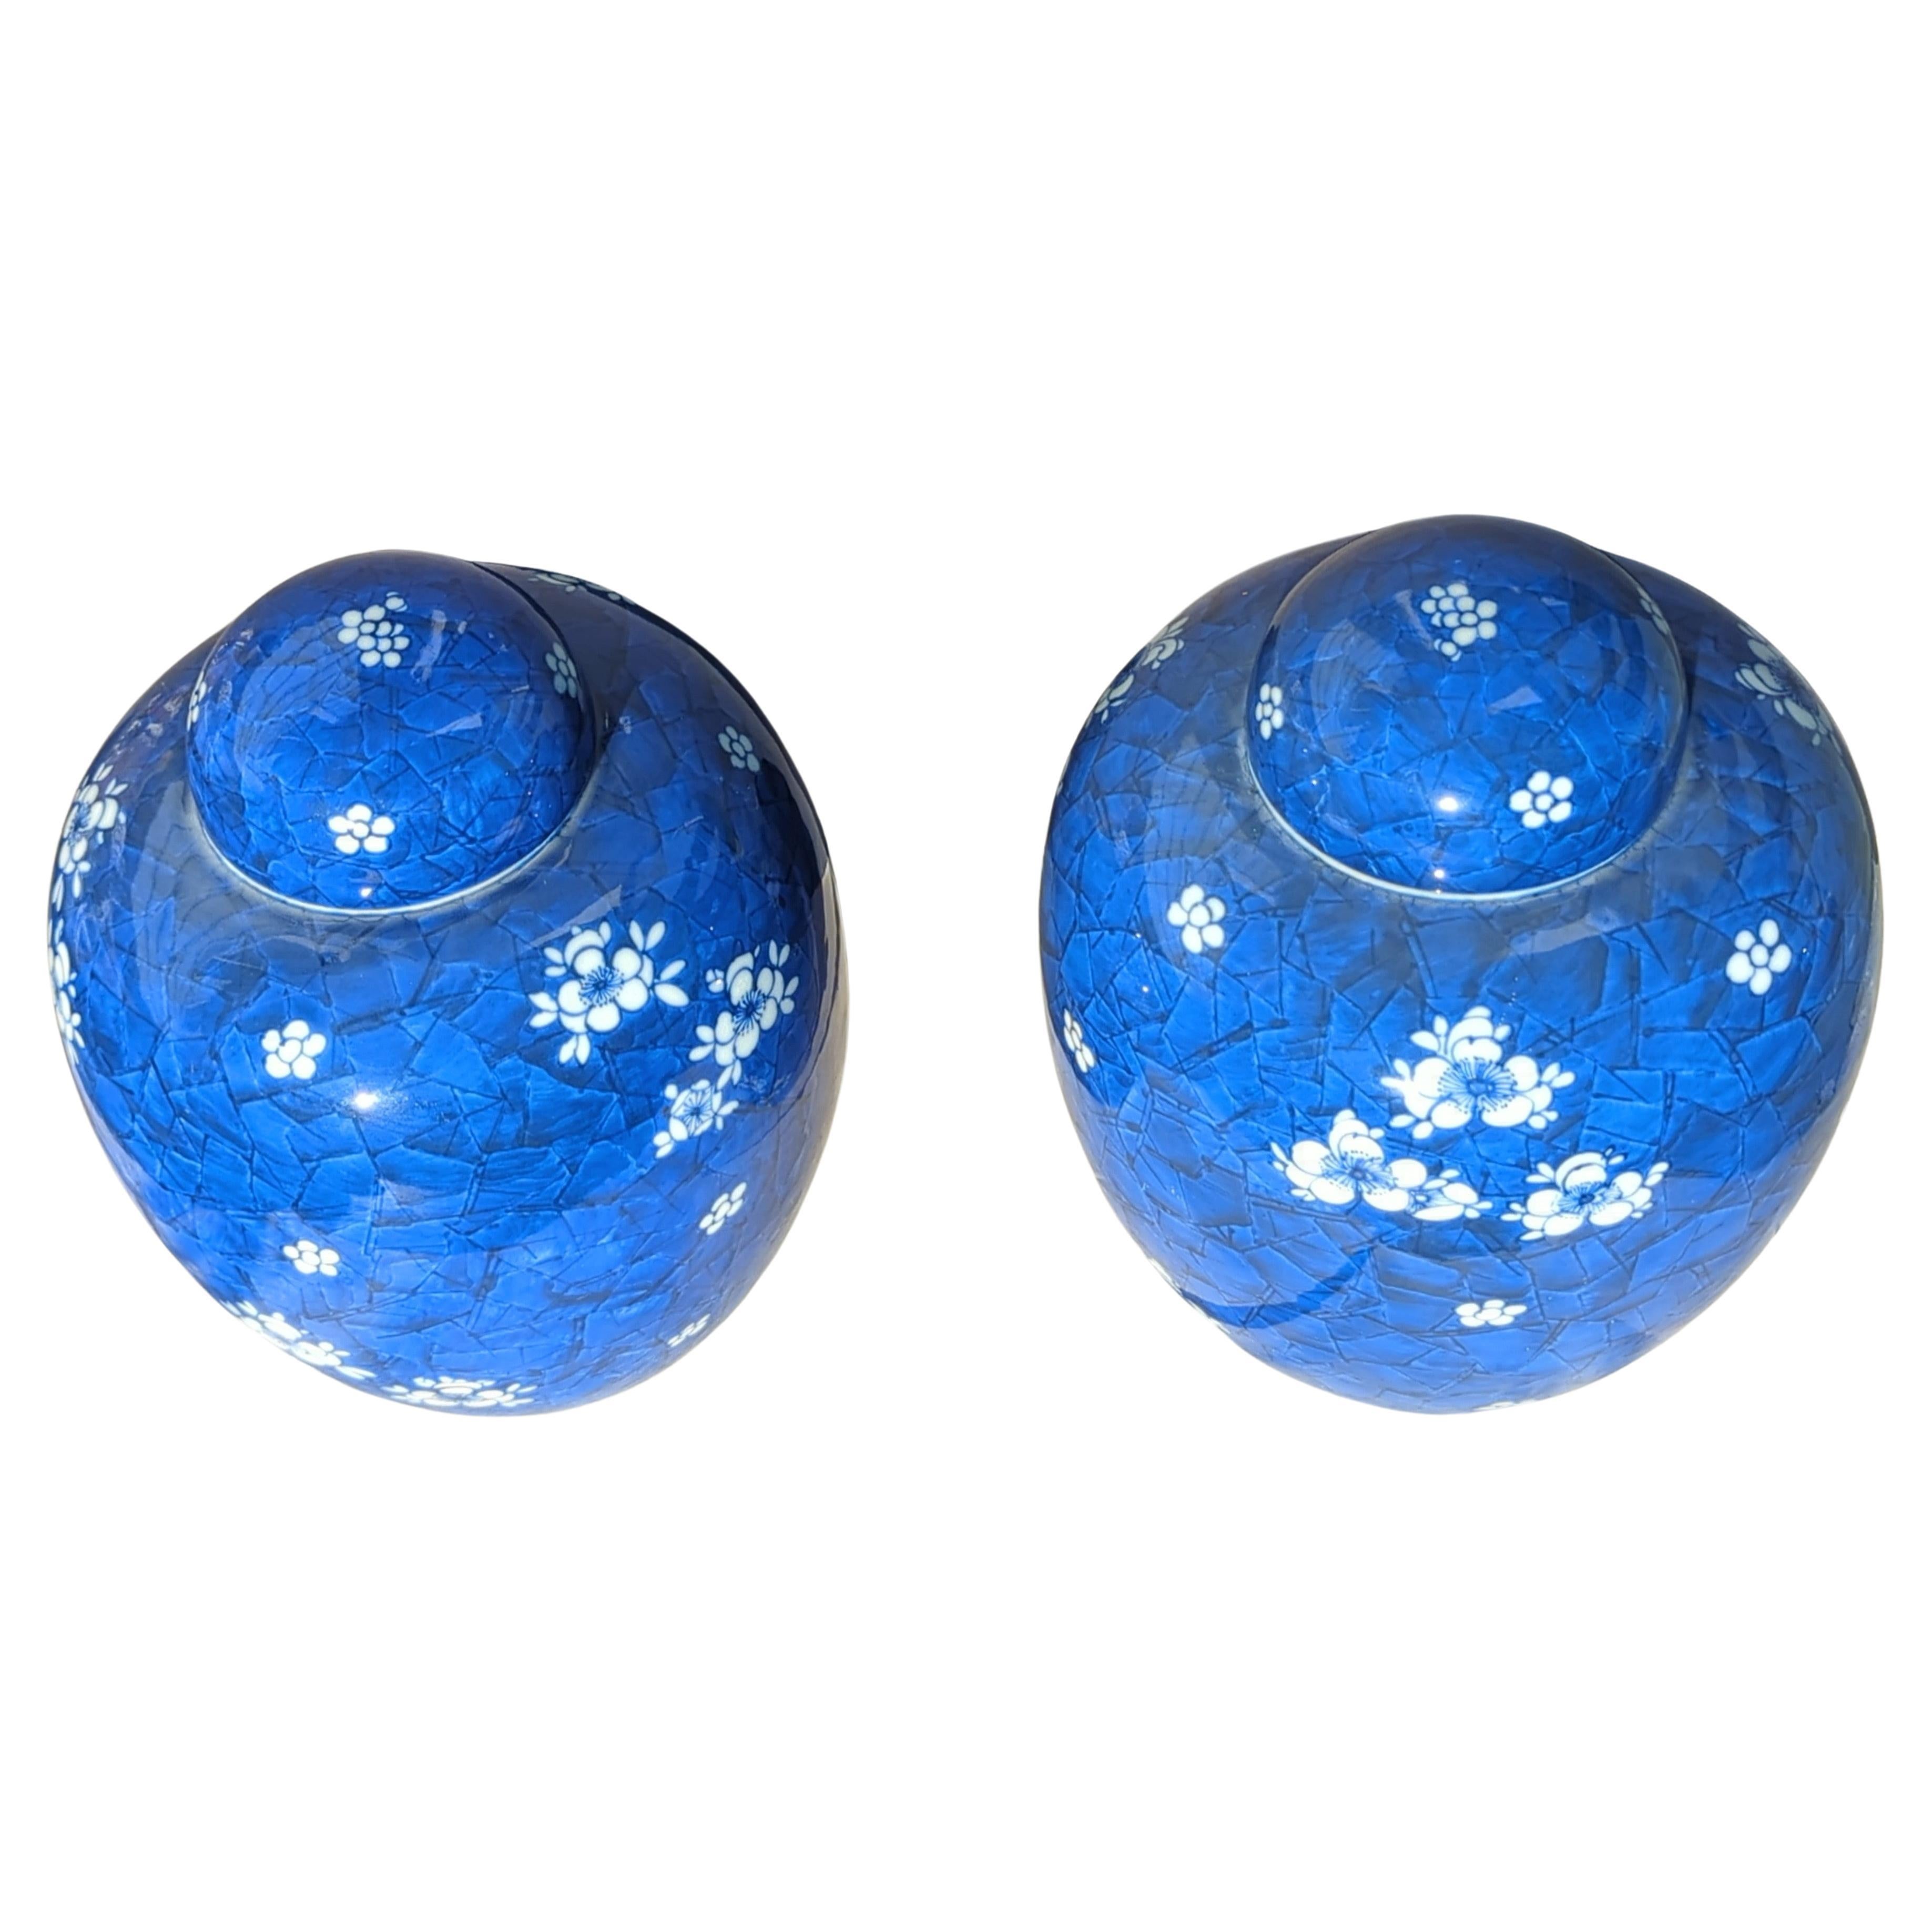 Pair of very fine vintage Chinese export blue and white hawthorn ginger jars, finely decorated with reserve plum blossoms. The white porcelain biscuit is very fine. Comes with original matching covers.
 
Size: H: 11